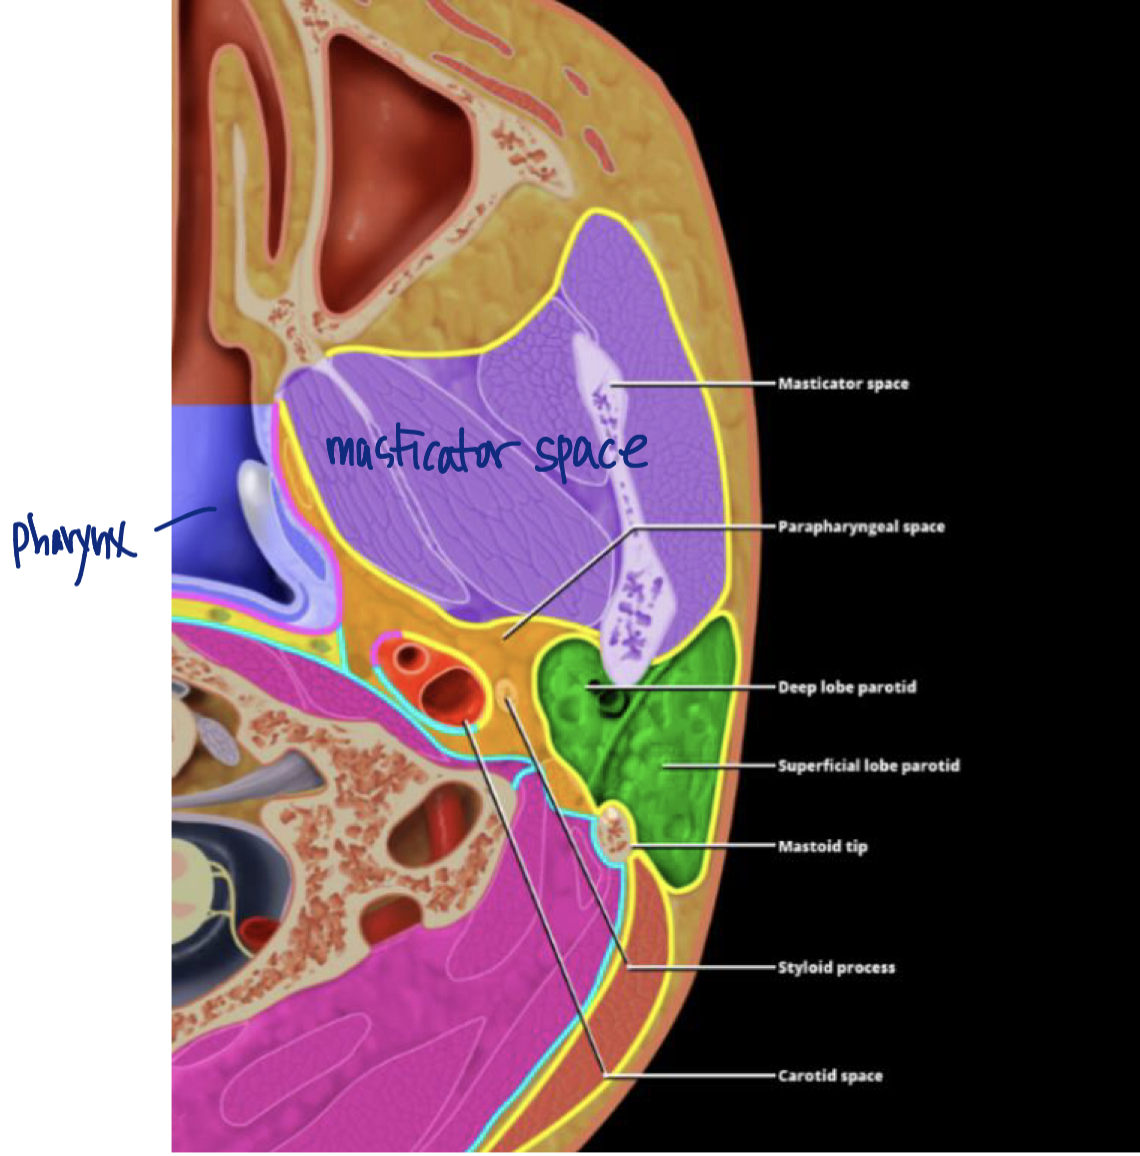 Parapharyngeal space